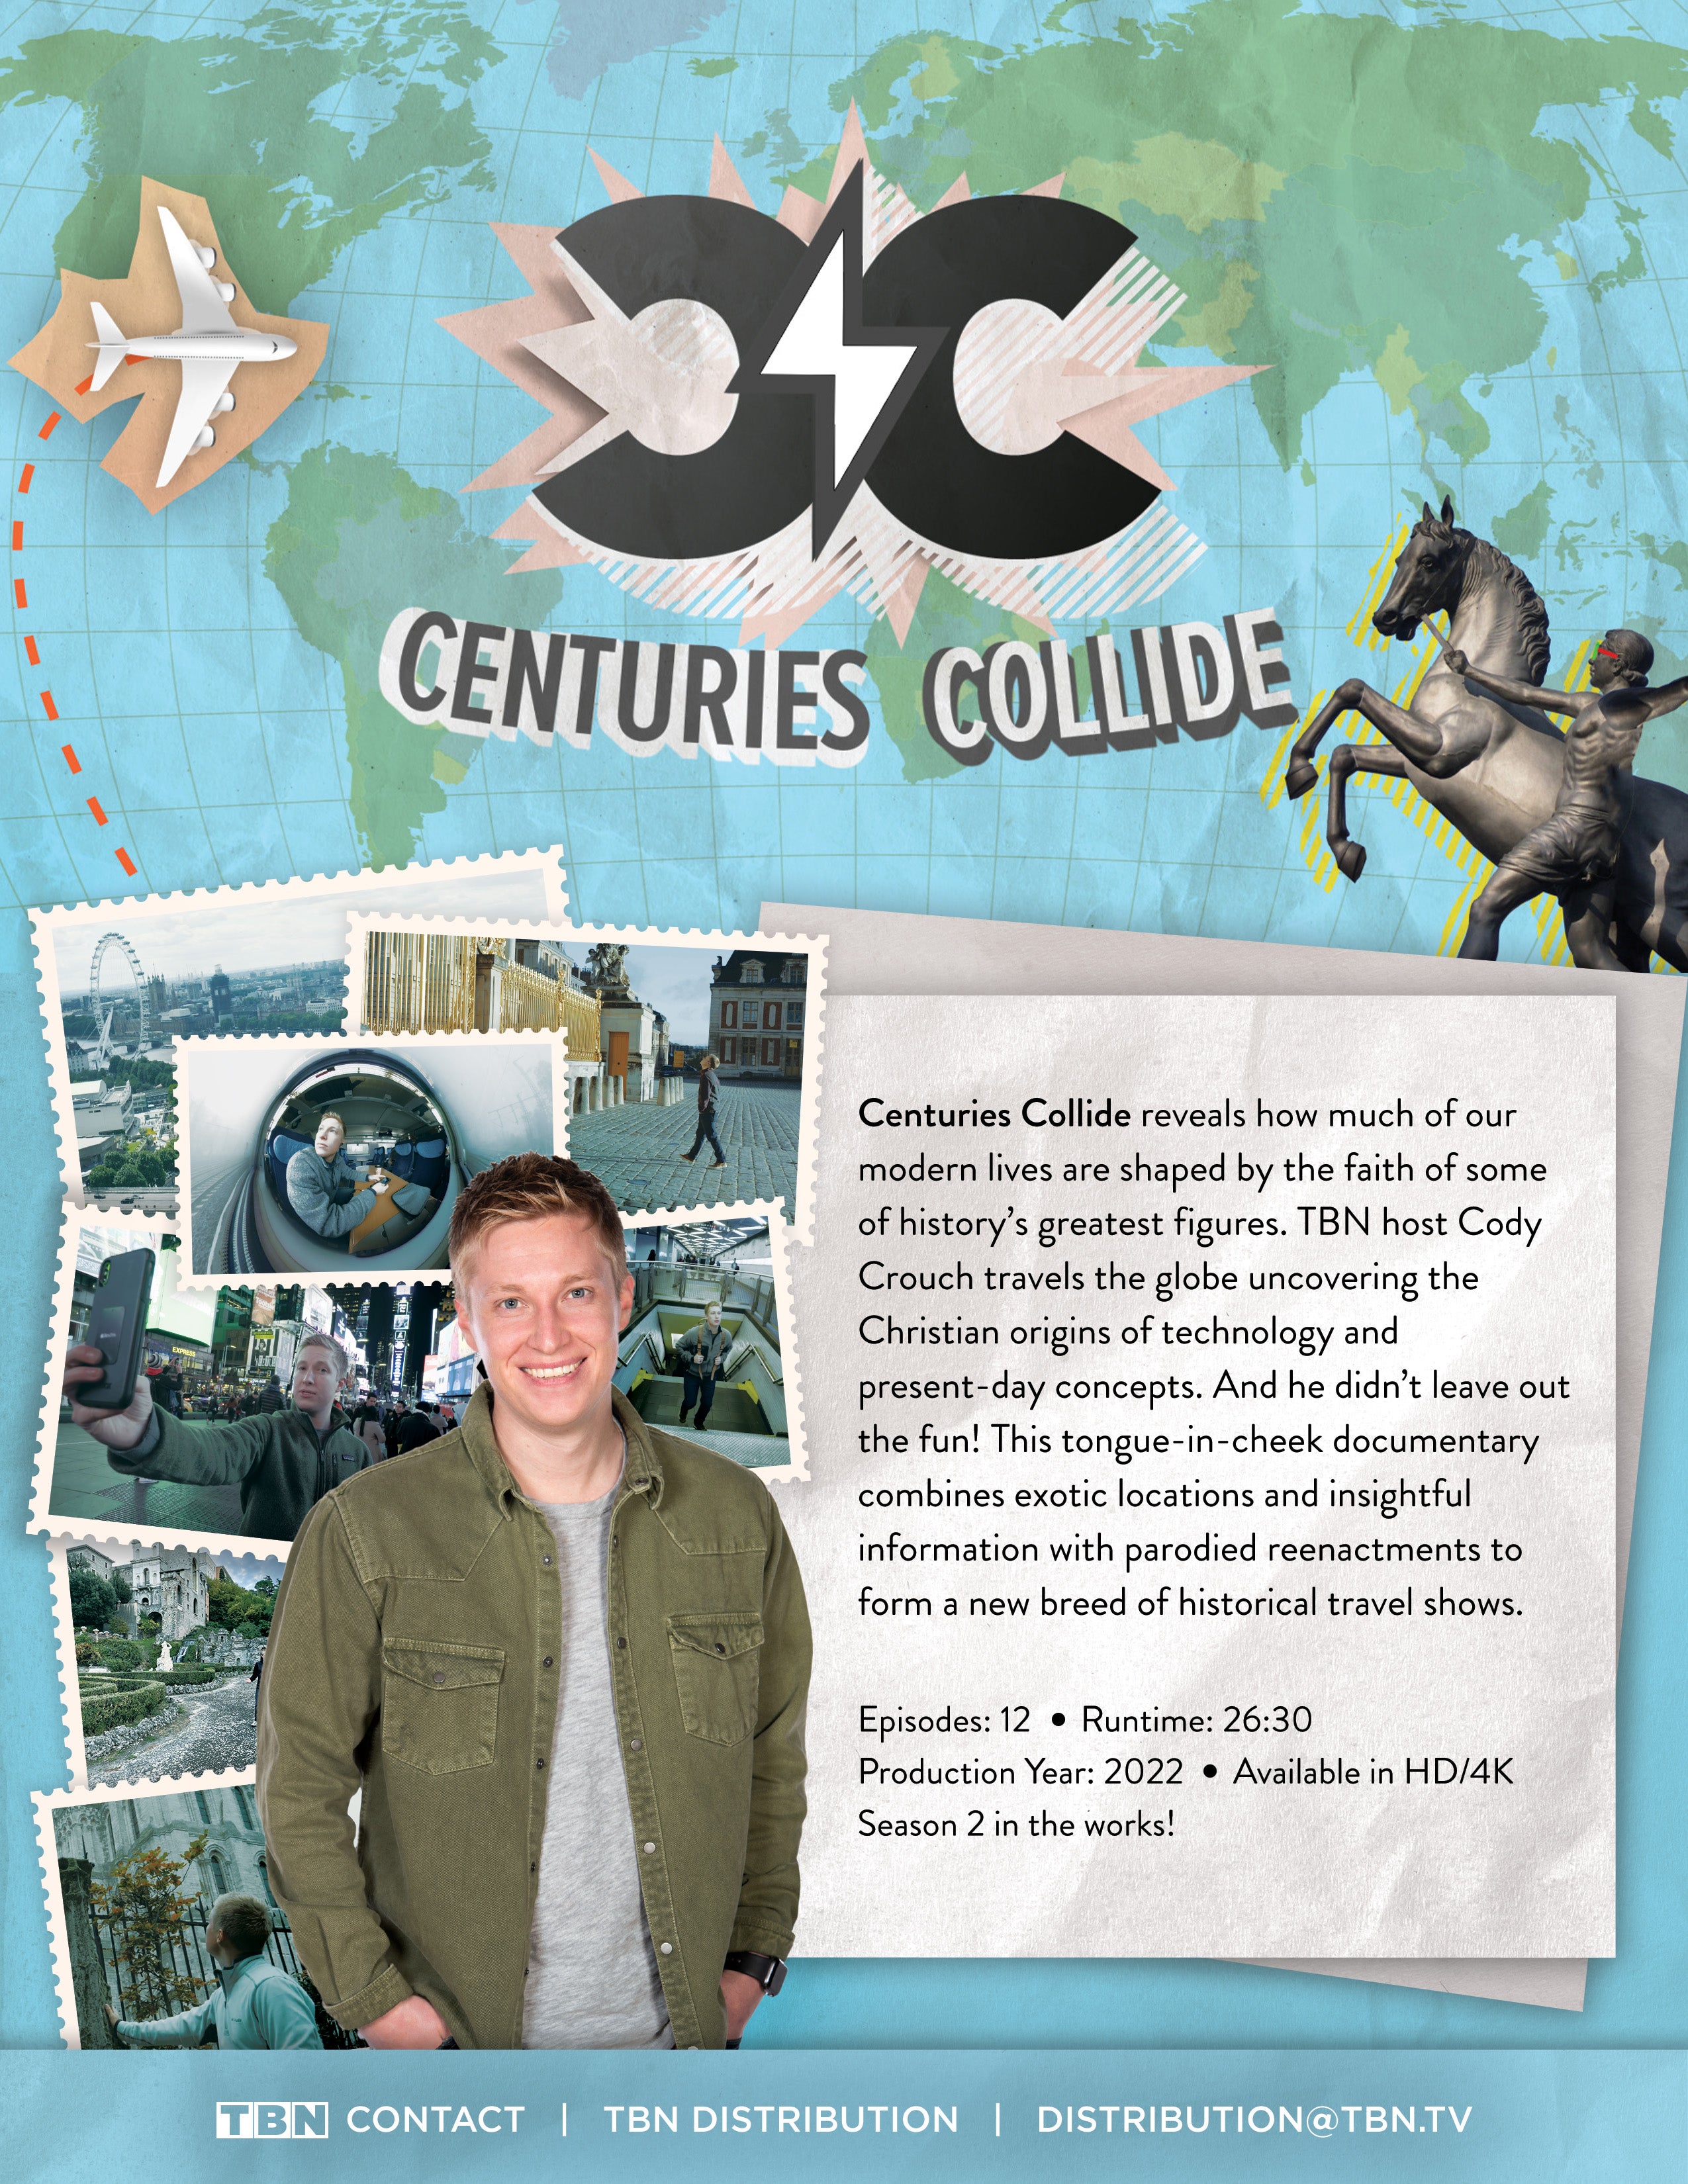 Centuries Collide reveals how much of our modern lives are shaped by the faith of some of history's greatest figures. TBN host Cody Crouch travels the globe uncovering the Christian origins of technology and present-day concepts. And he didn't leave out the fun! This tongue-in-cheek documentary combines exotic locations and insightful information with parodied reenactments to form a new breed of historical travel shows.